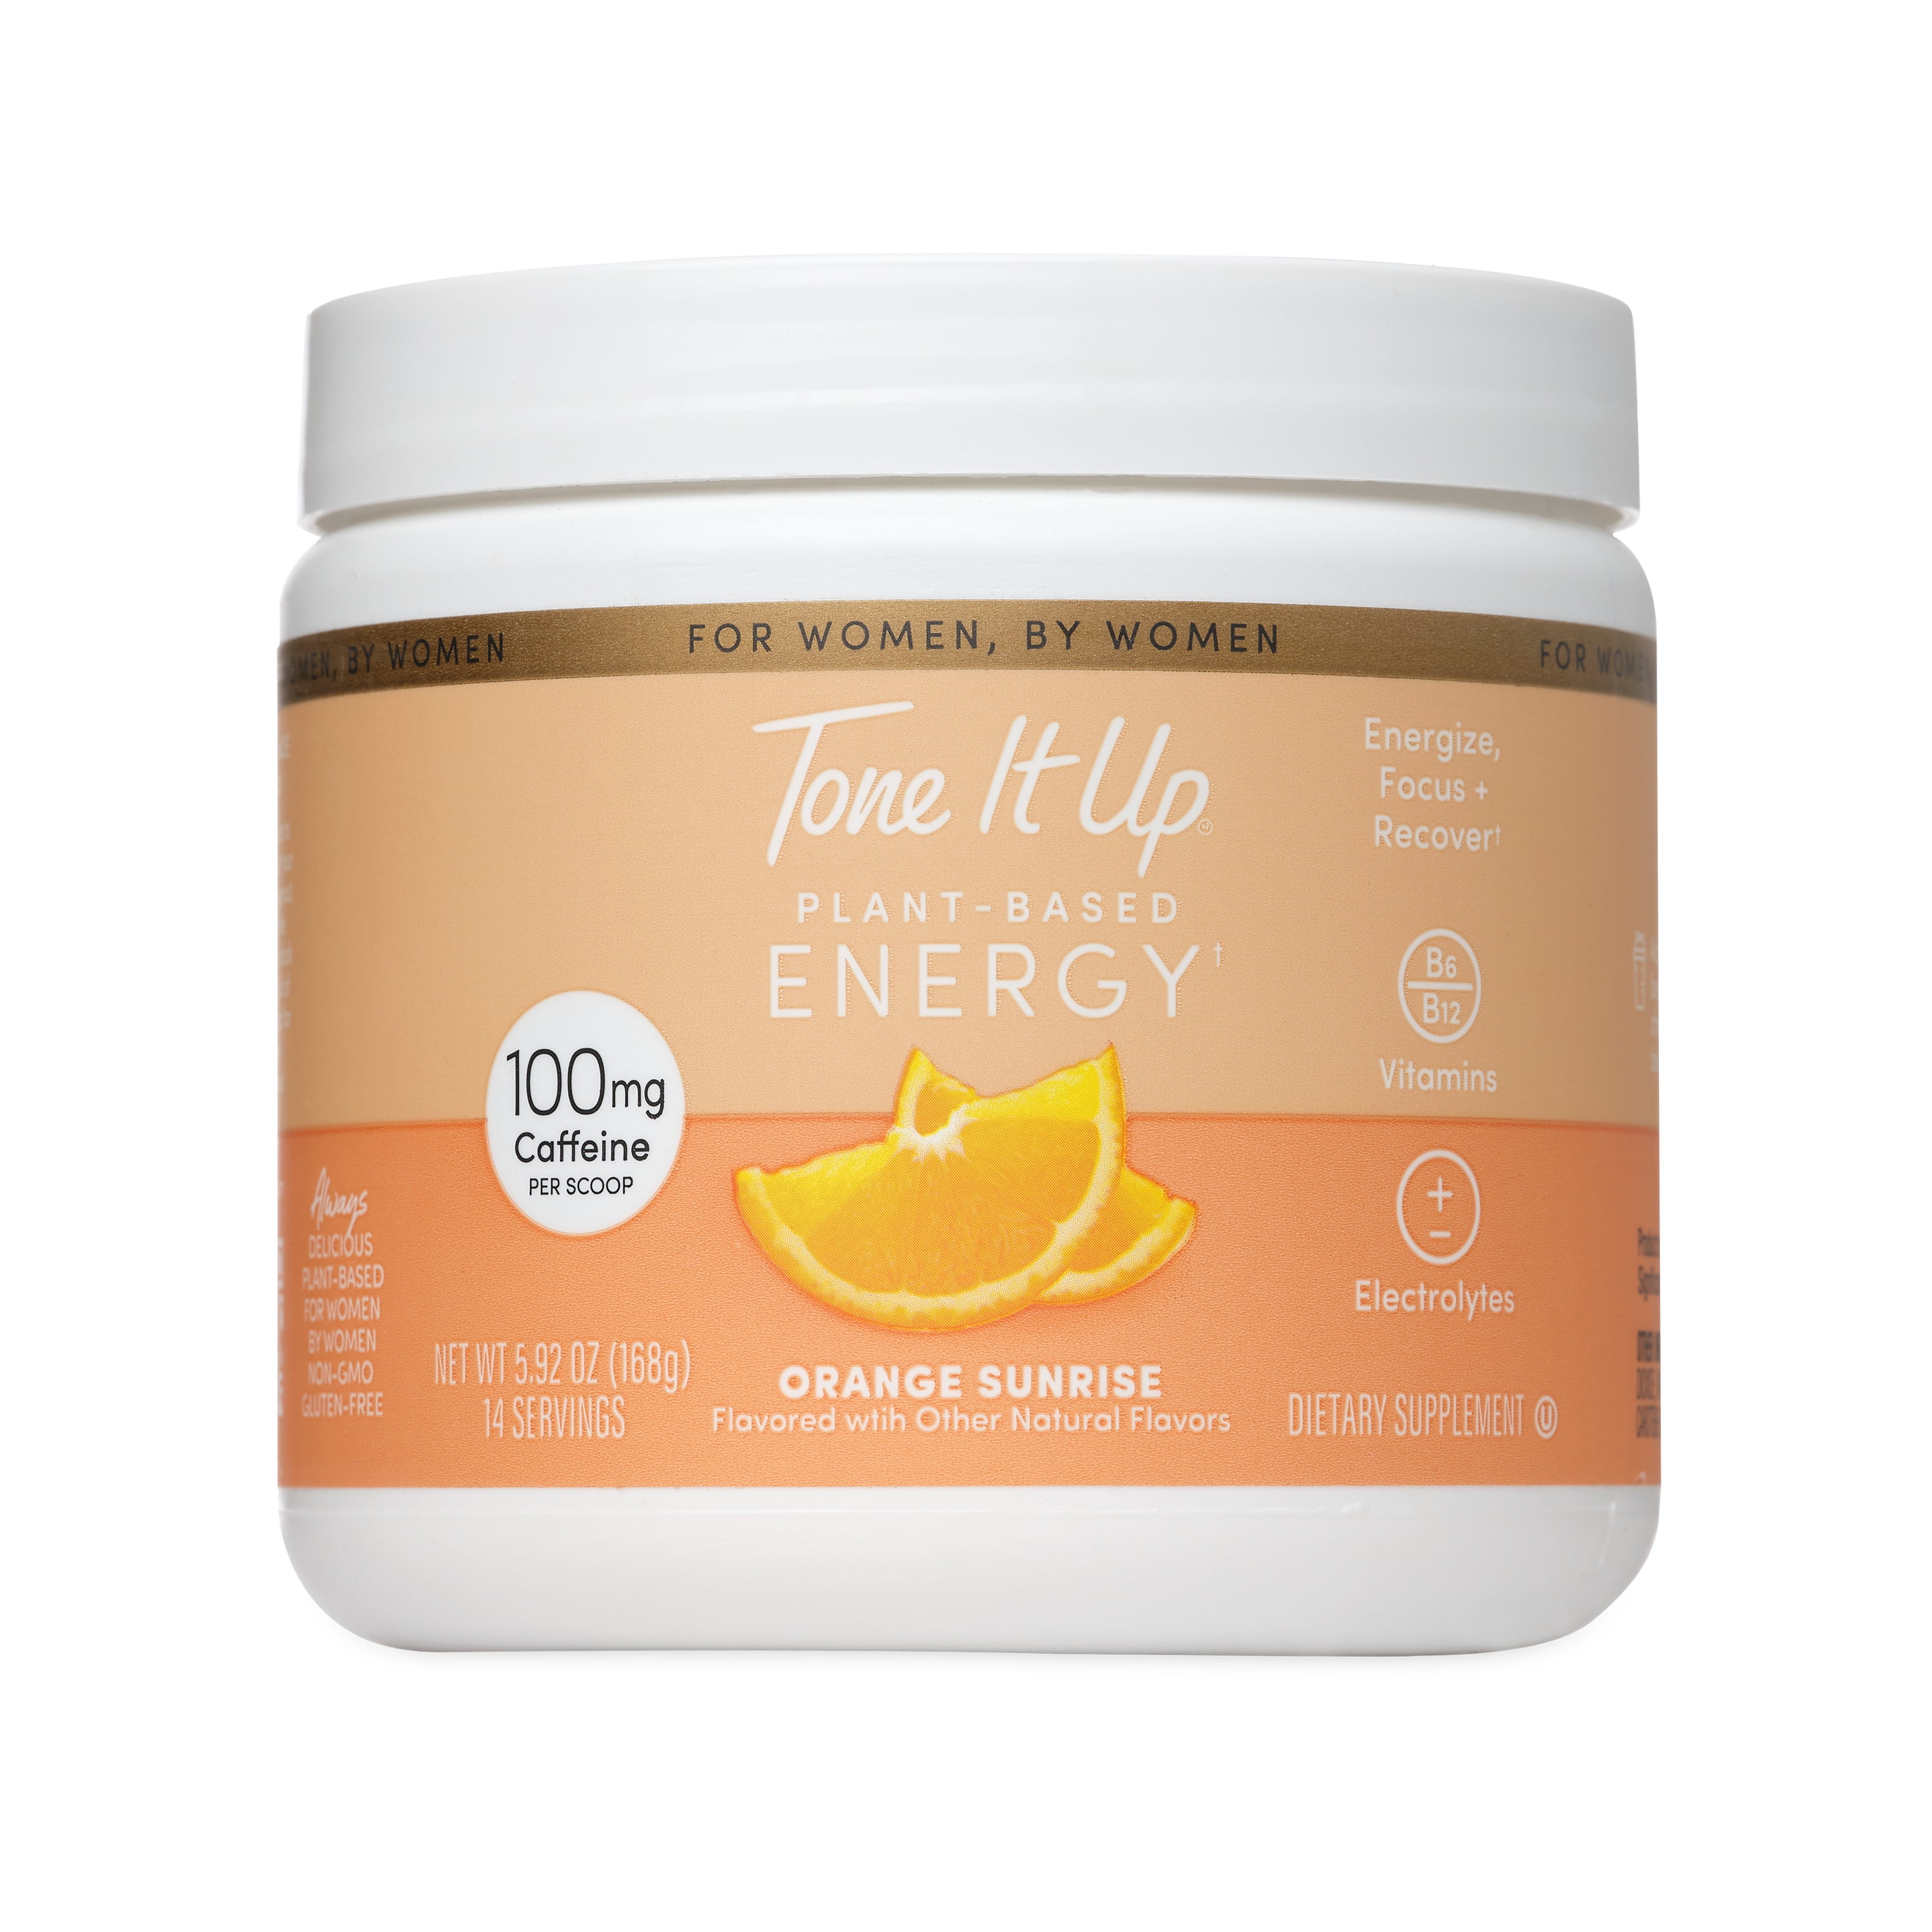 Tone It Up Plant-Based Energy Mix Very Berry Flavored